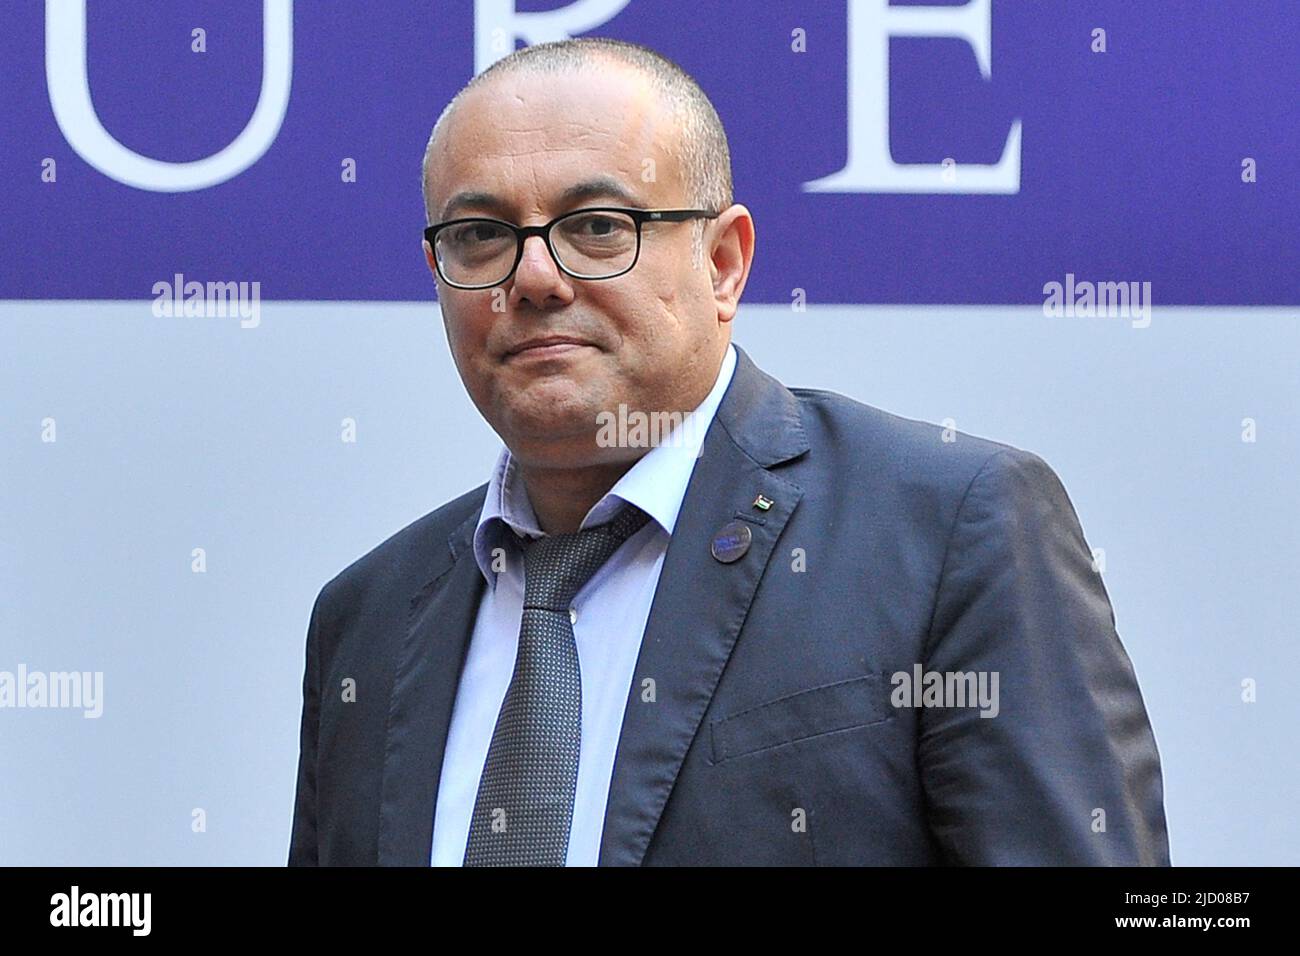 Napoli, Italy. 16th June, 2022. Atef Abu Saif minister of culture, during the Conference of the ministers of culture of the Mediterranean organized in Naples at the Royal Palace. Napoli, Italy, 16 July 2022. (photo by Vincenzo Izzo/Sipa USA) Credit: Sipa USA/Alamy Live News Stock Photo